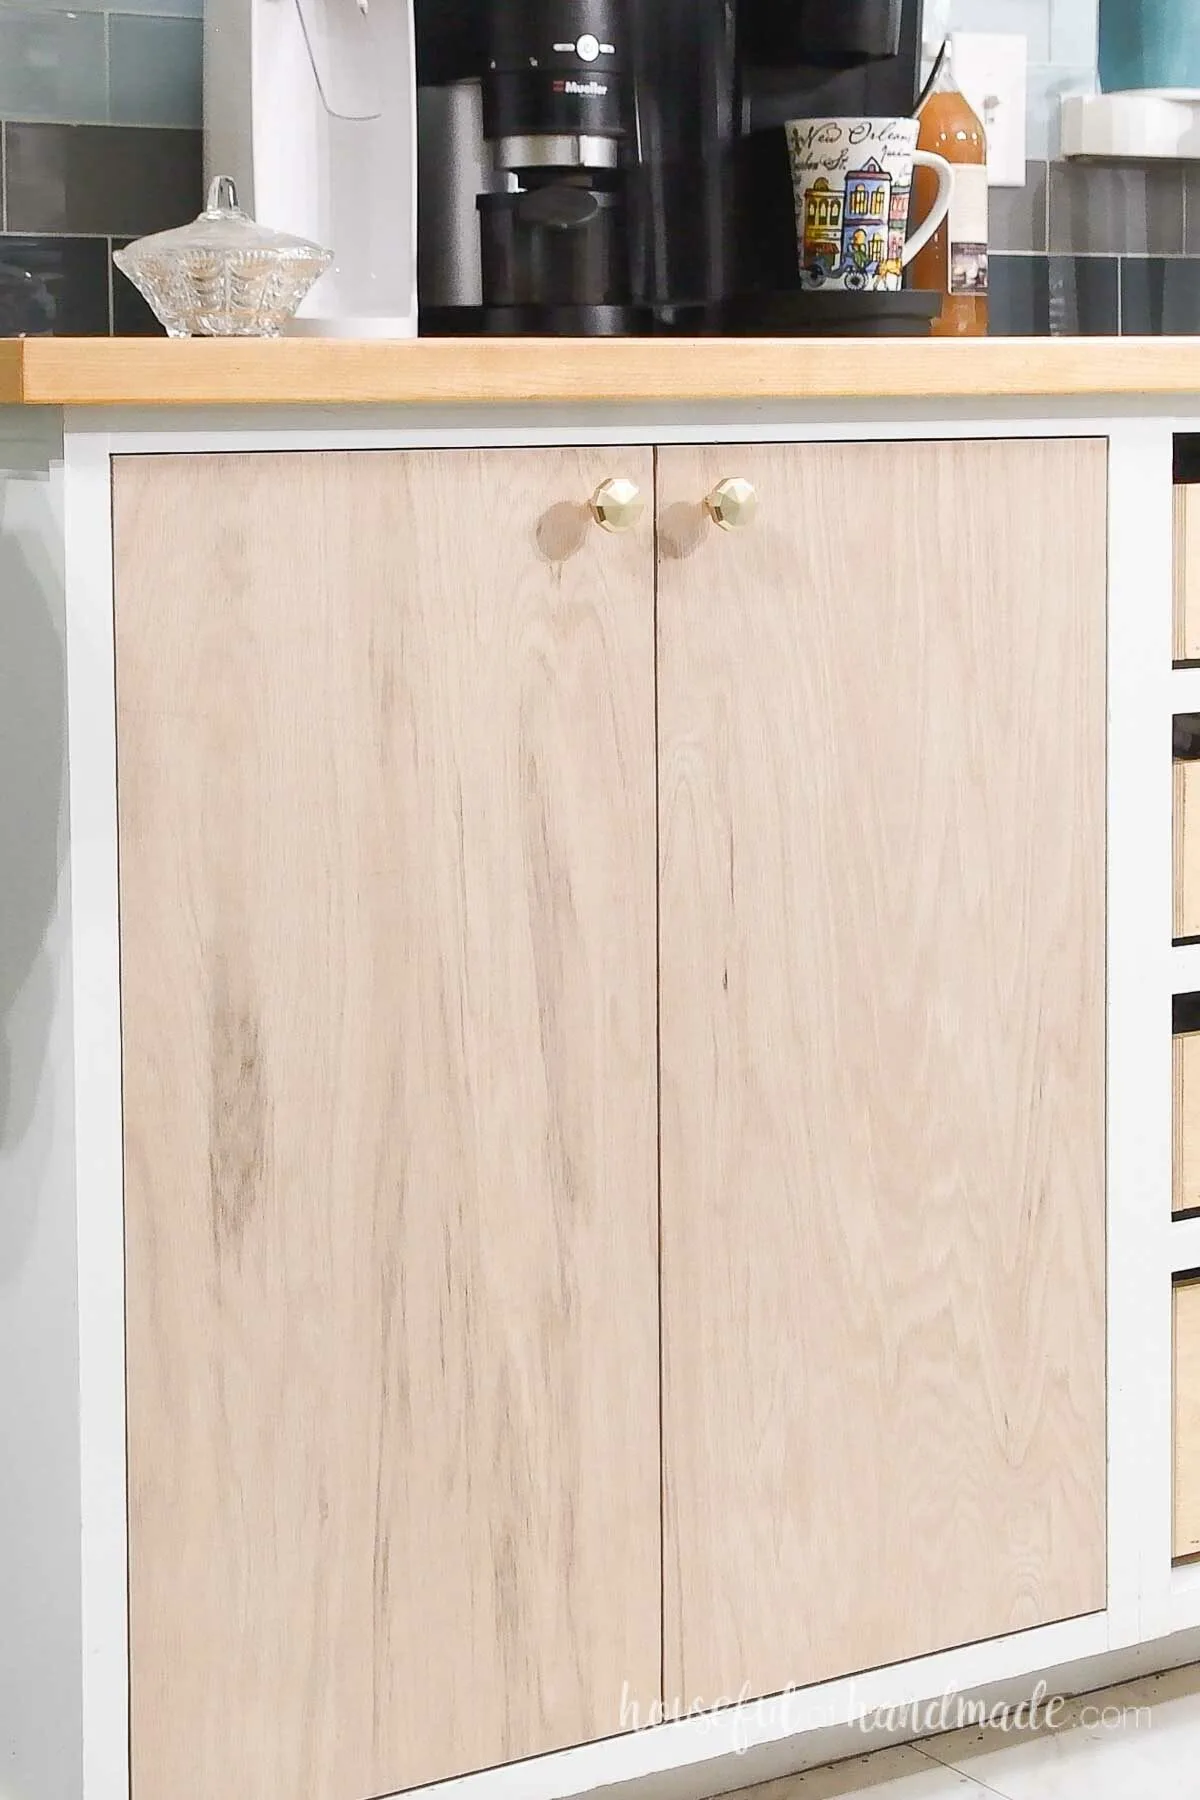 The closed cabinet doors attached with knobs.